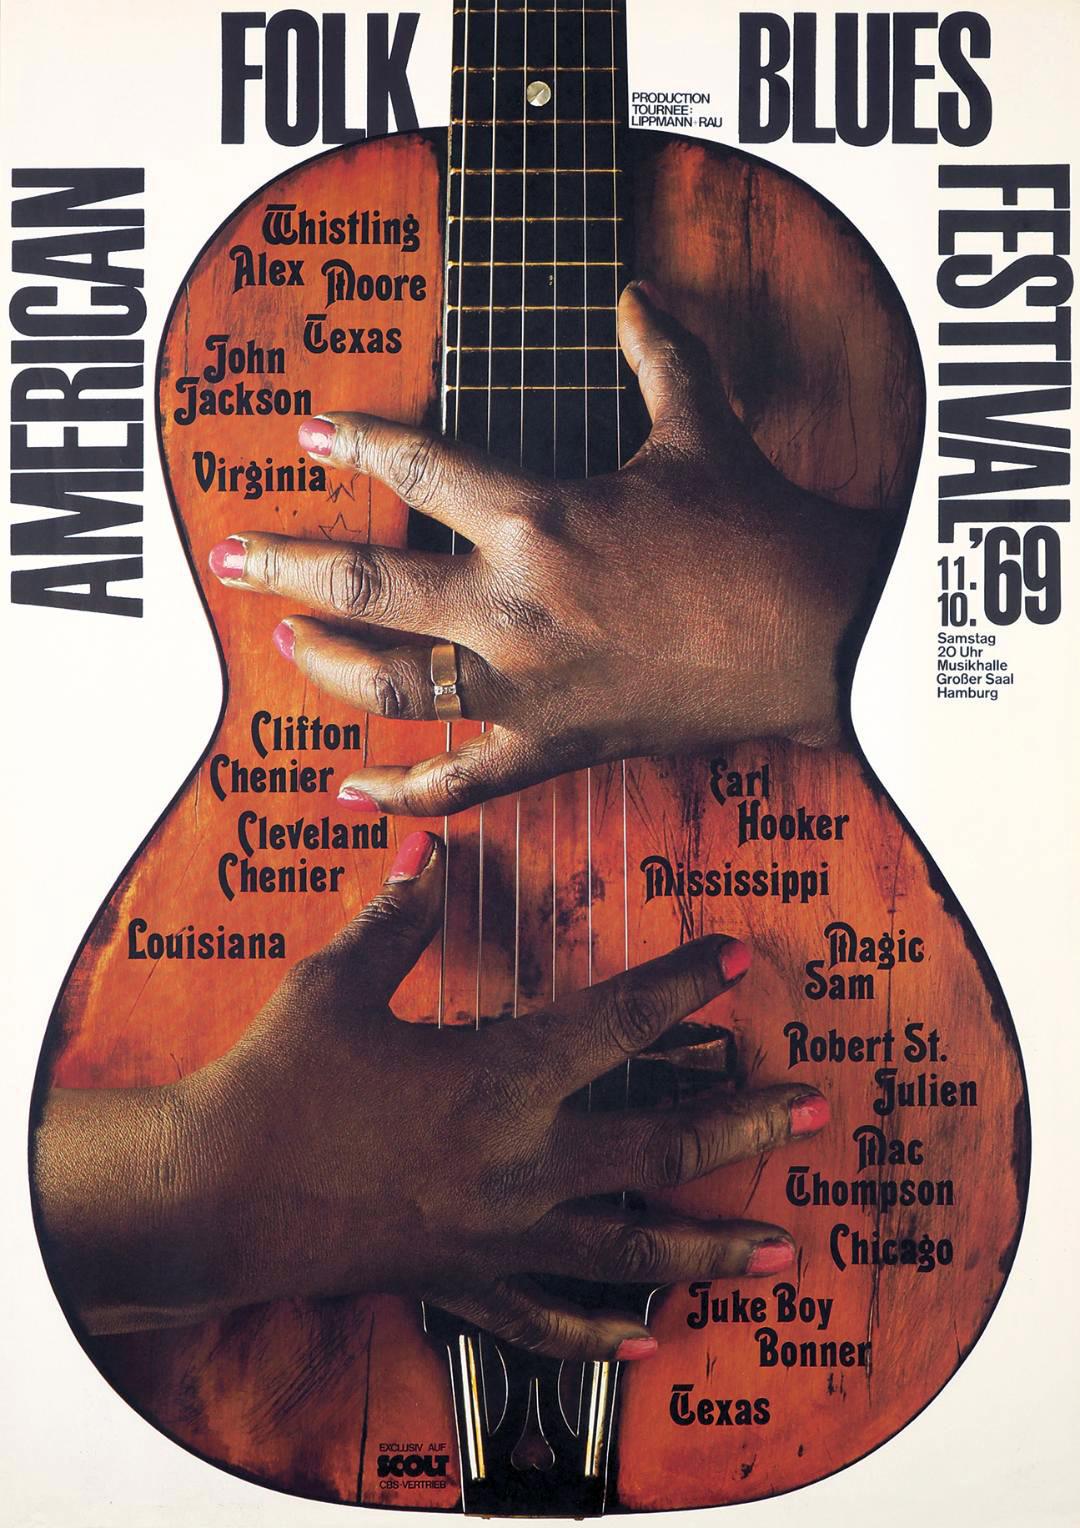 Gunther Kieser American folk blues festival poster, 1969
Keiser's poster for the annual Hamburg festival devoted to American folk blues featuring a compelling pictorial of a well-worn acoustic guitar. Here, the instrument seems to be playing itself